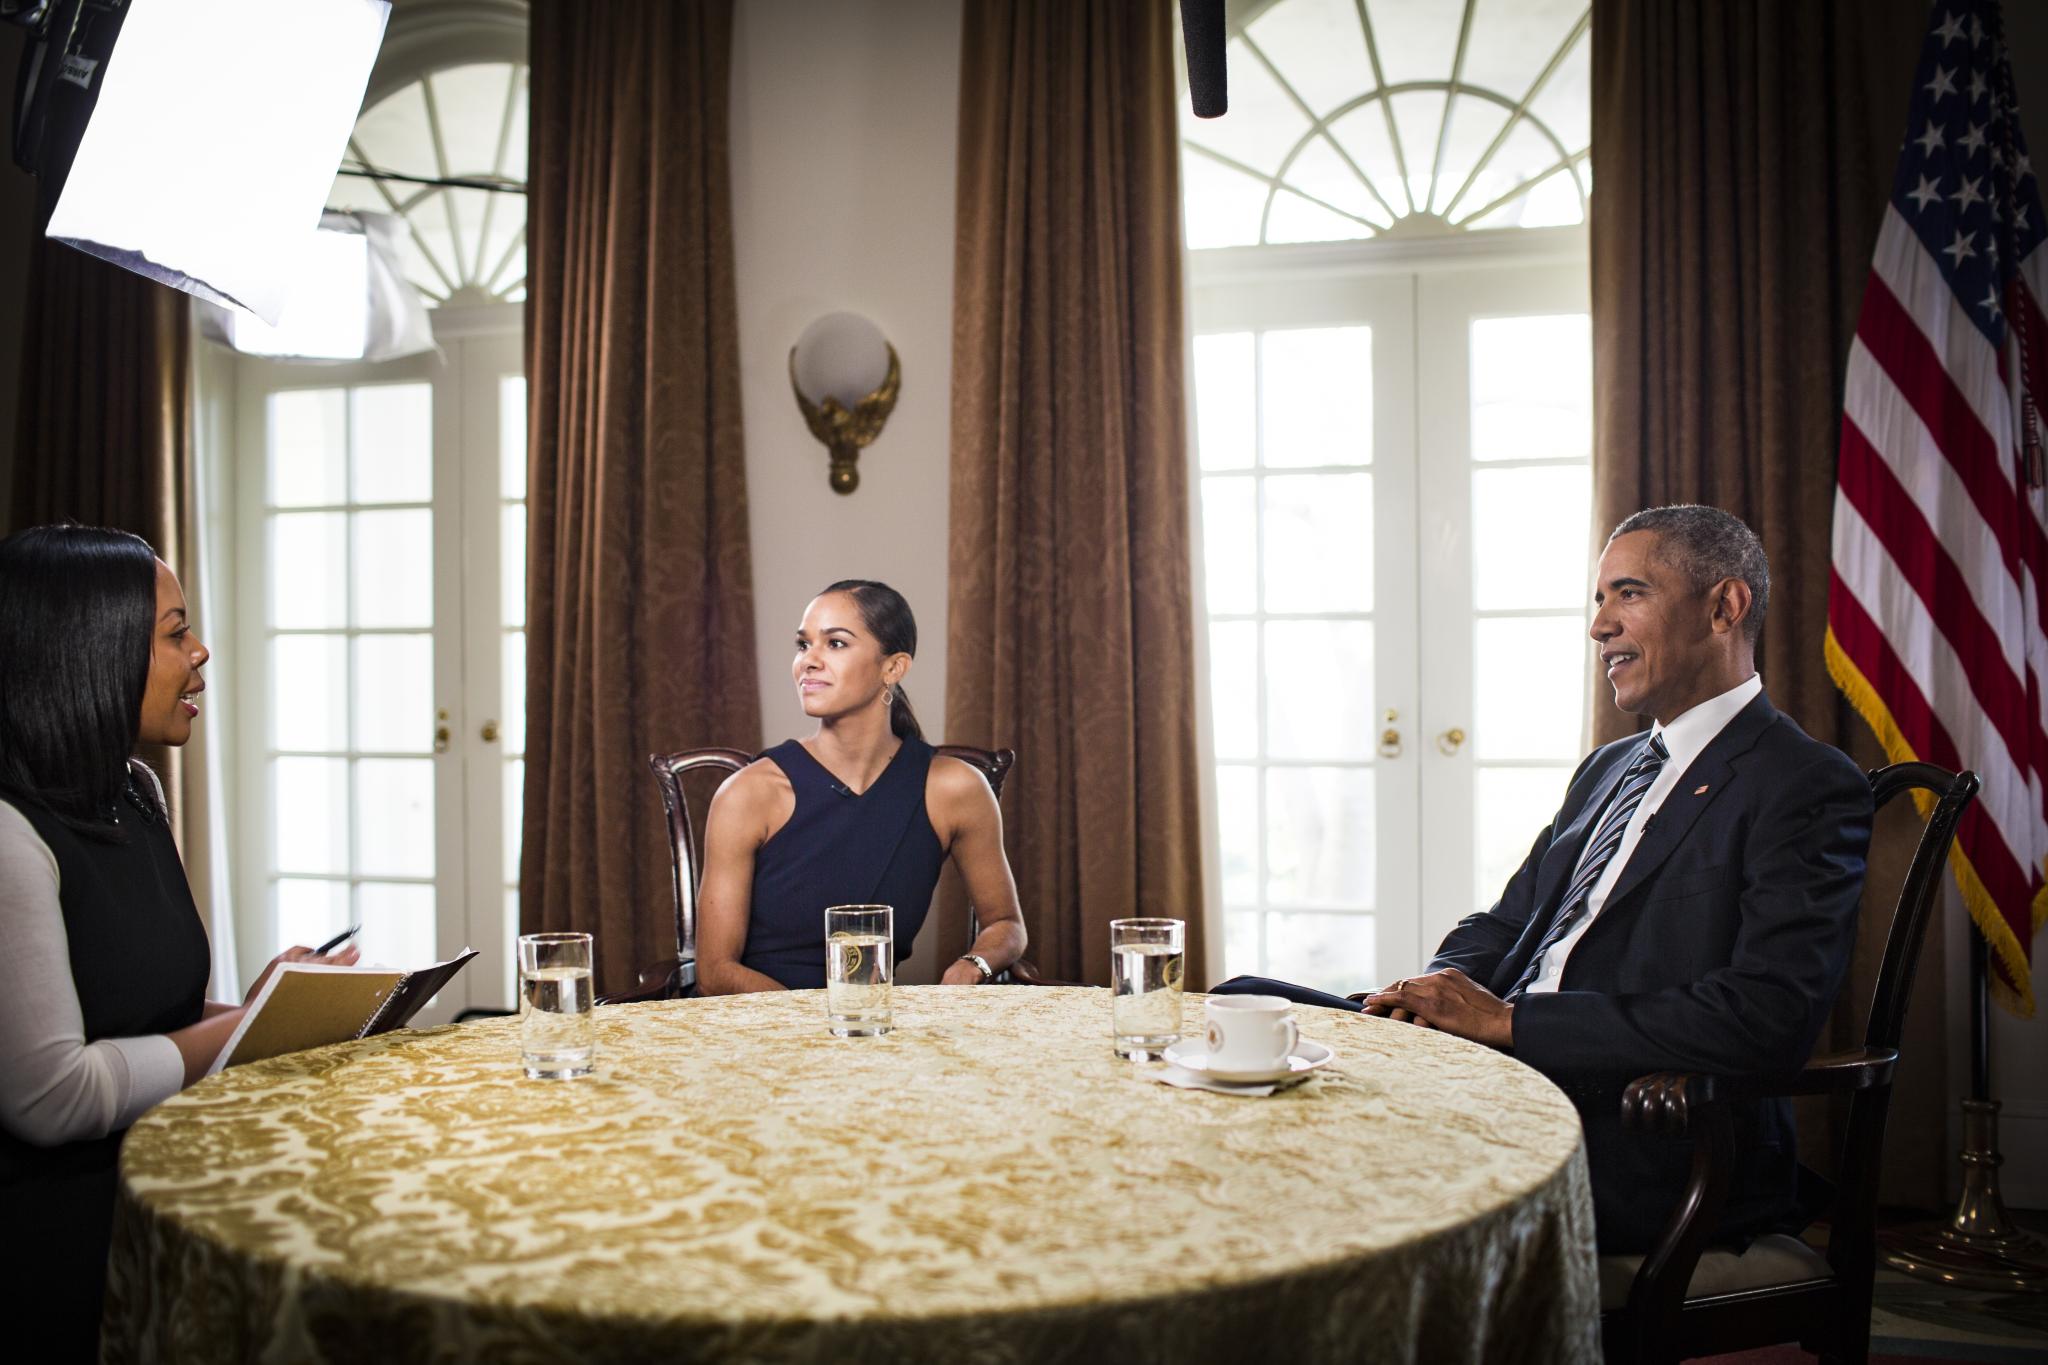 President Obama and Misty Copeland on the Lessons They've Learned About Race